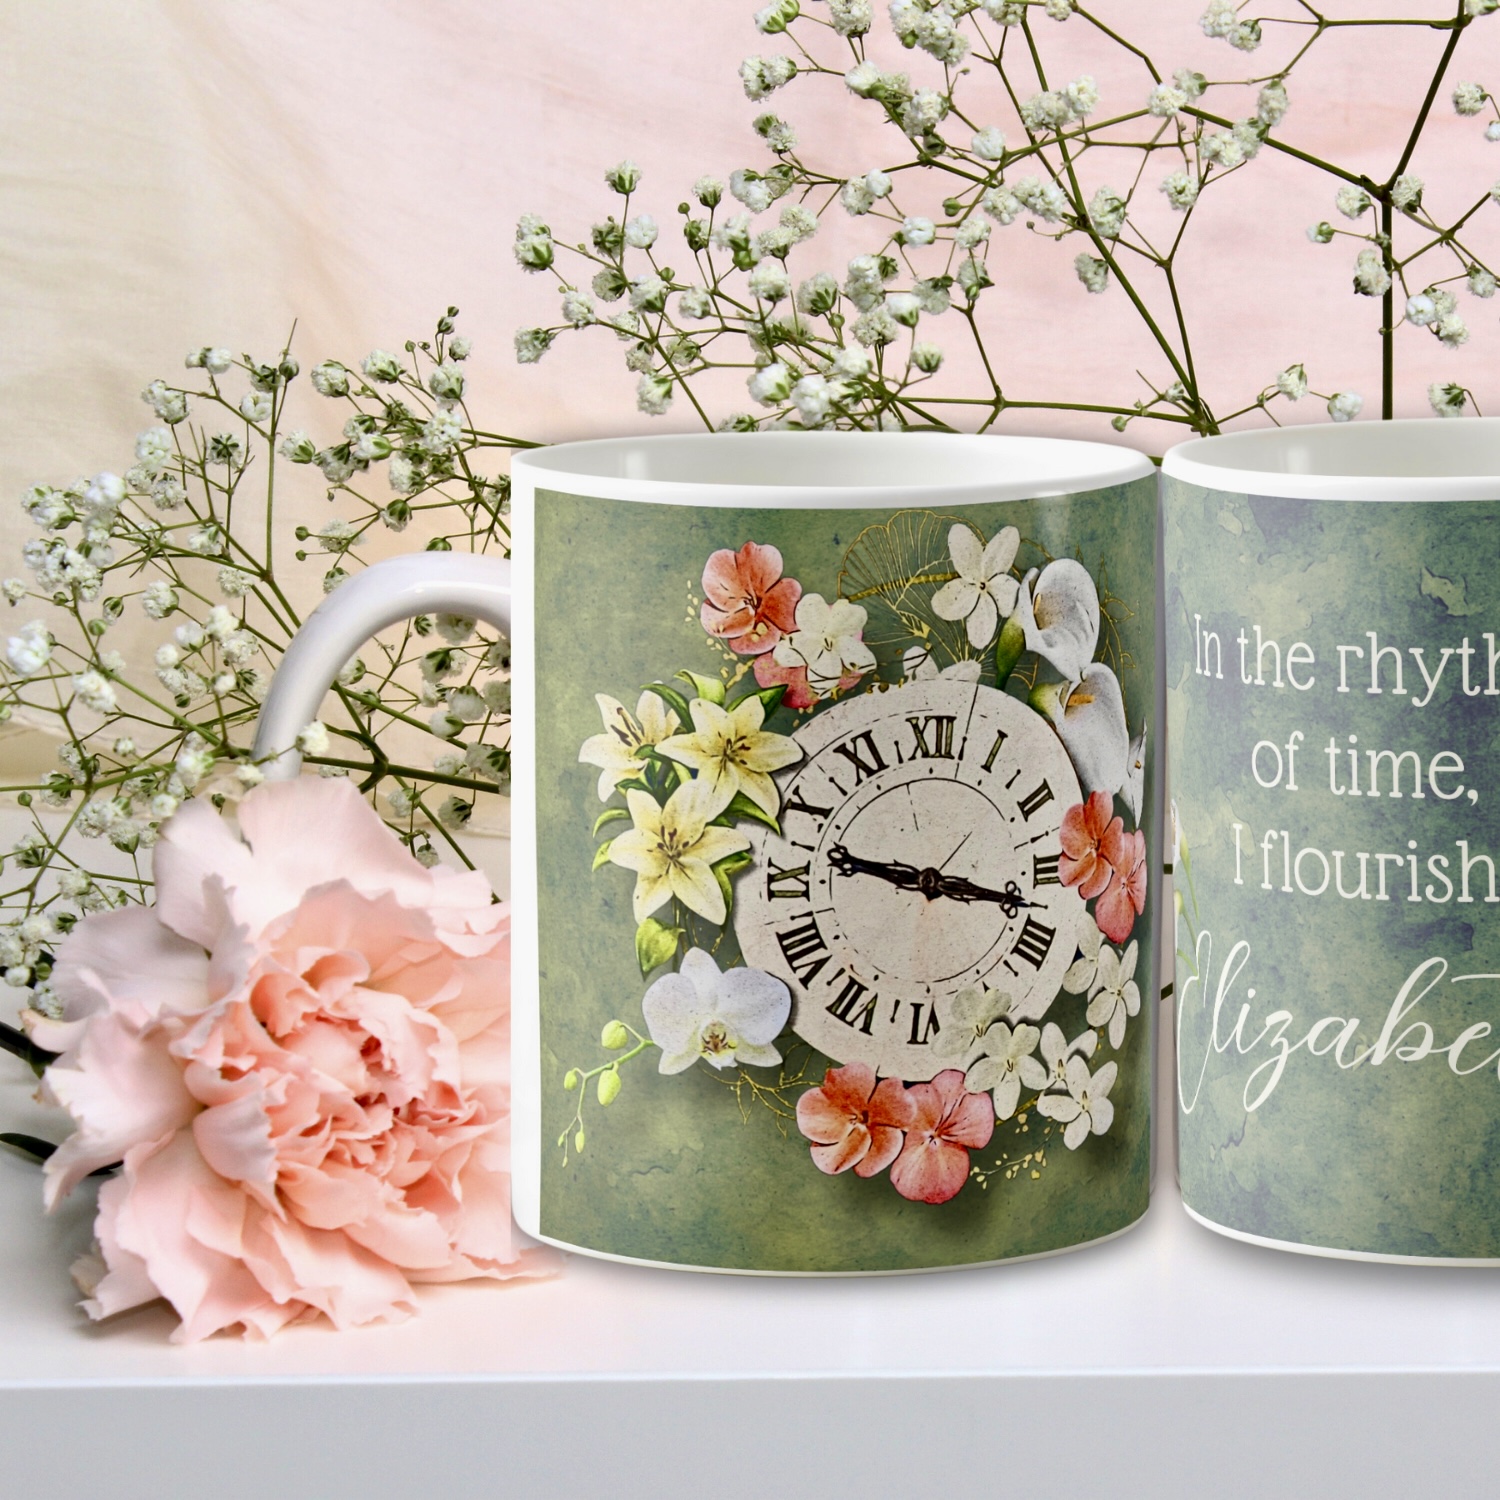 Two moss green coffee mugs with a vintage clock and flowers, inspirational message and space for name.